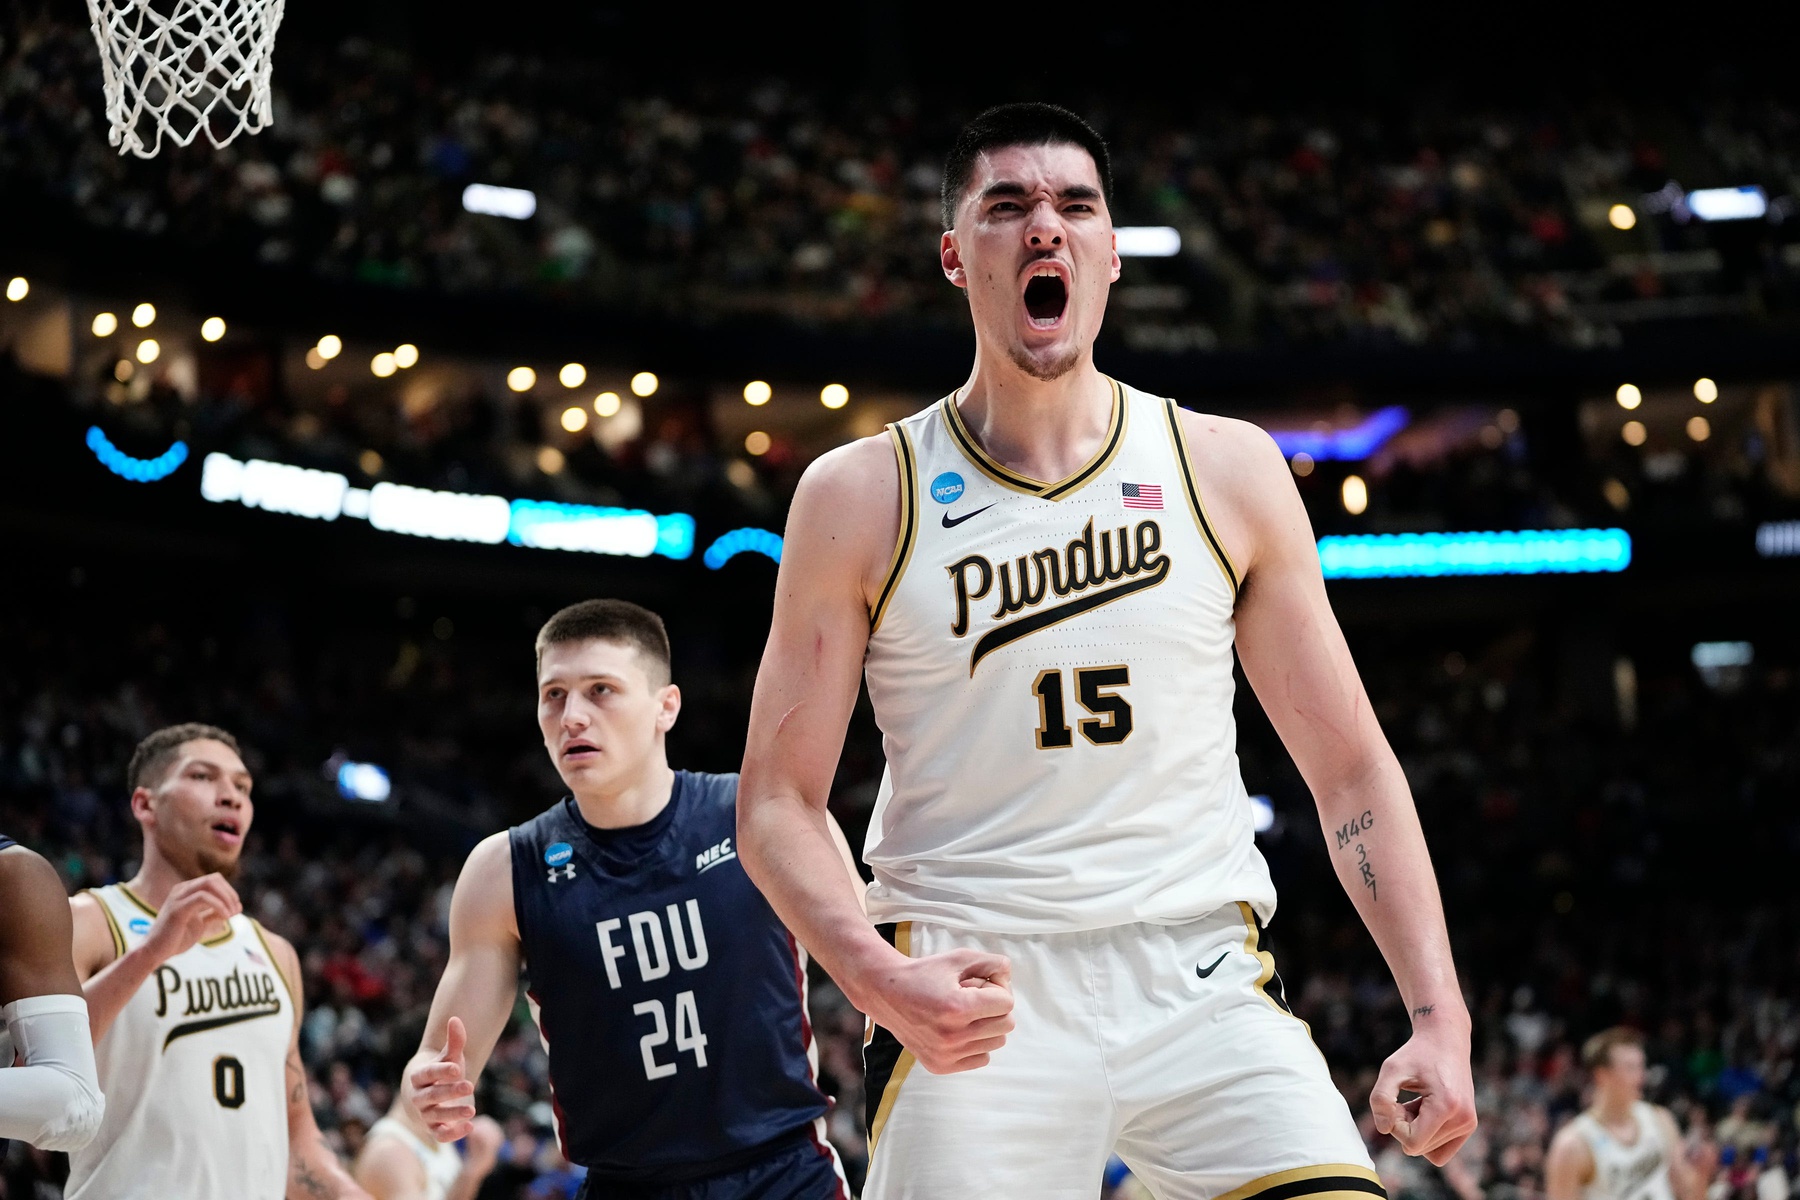 Mar 17, 2023; Columbus, Ohio, USA; Purdue Boilermakers center Zach Edey (15) celebrates making a basket during the first round of the NCAA men’s basketball tournament against the Fairleigh Dickinson Knights at Nationwide Arena. Mandatory Credit: Adam Cairns-The Columbus Dispatch Basketball Ncaa Men S Basketball Tournament